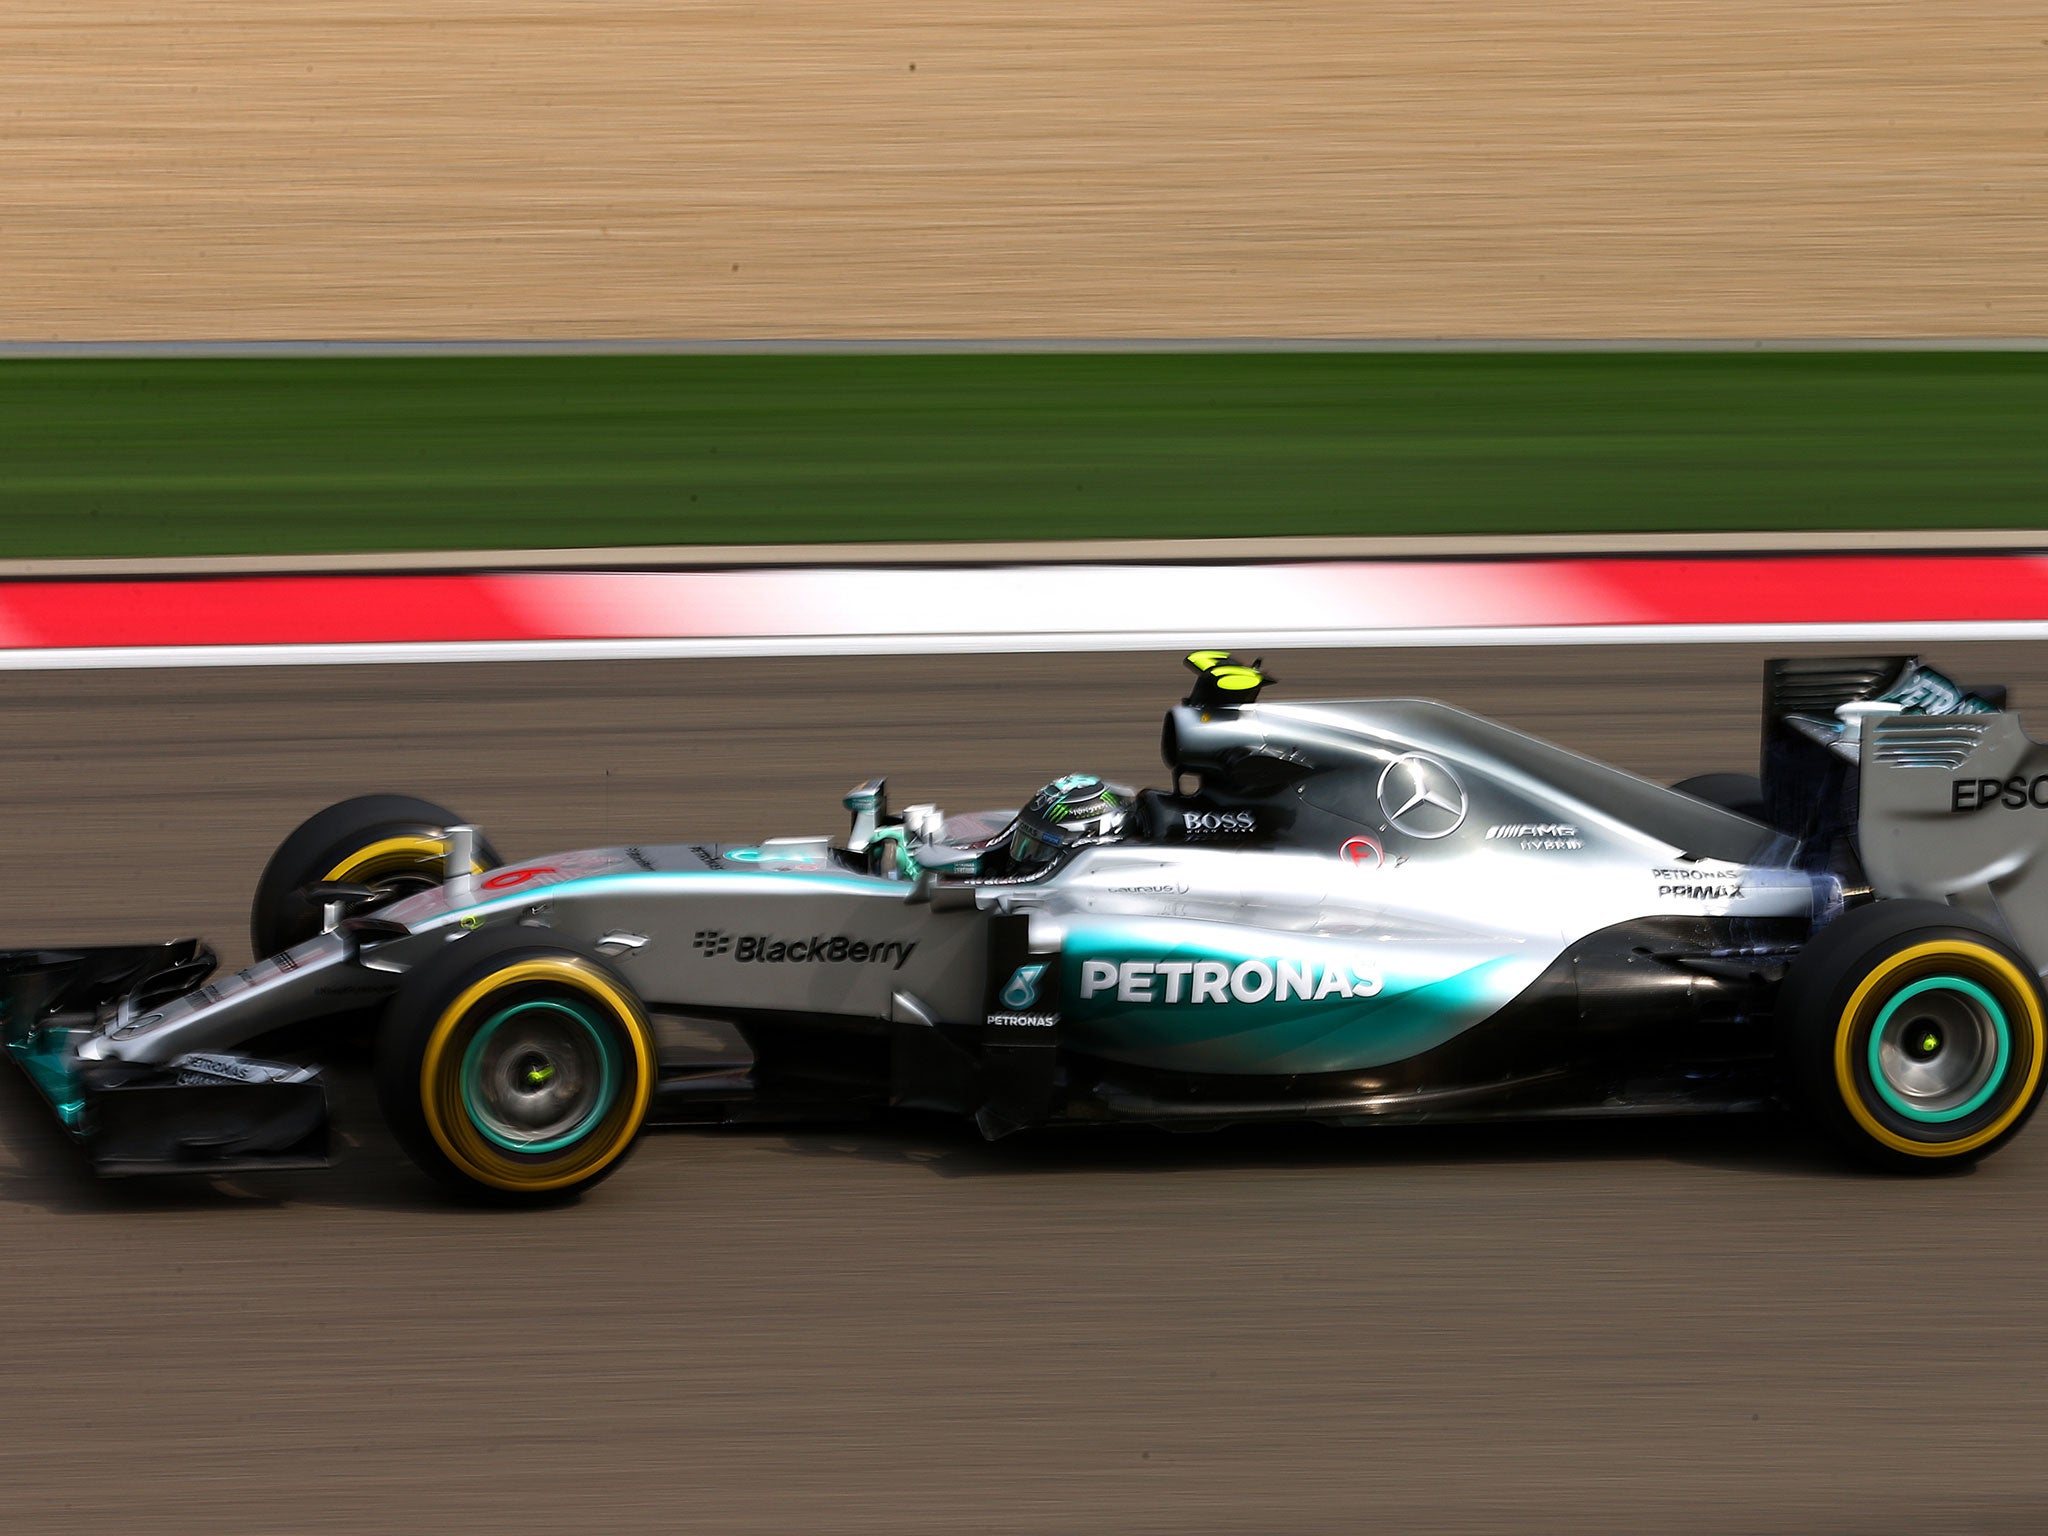 Nico Rosberg finished second in practice one